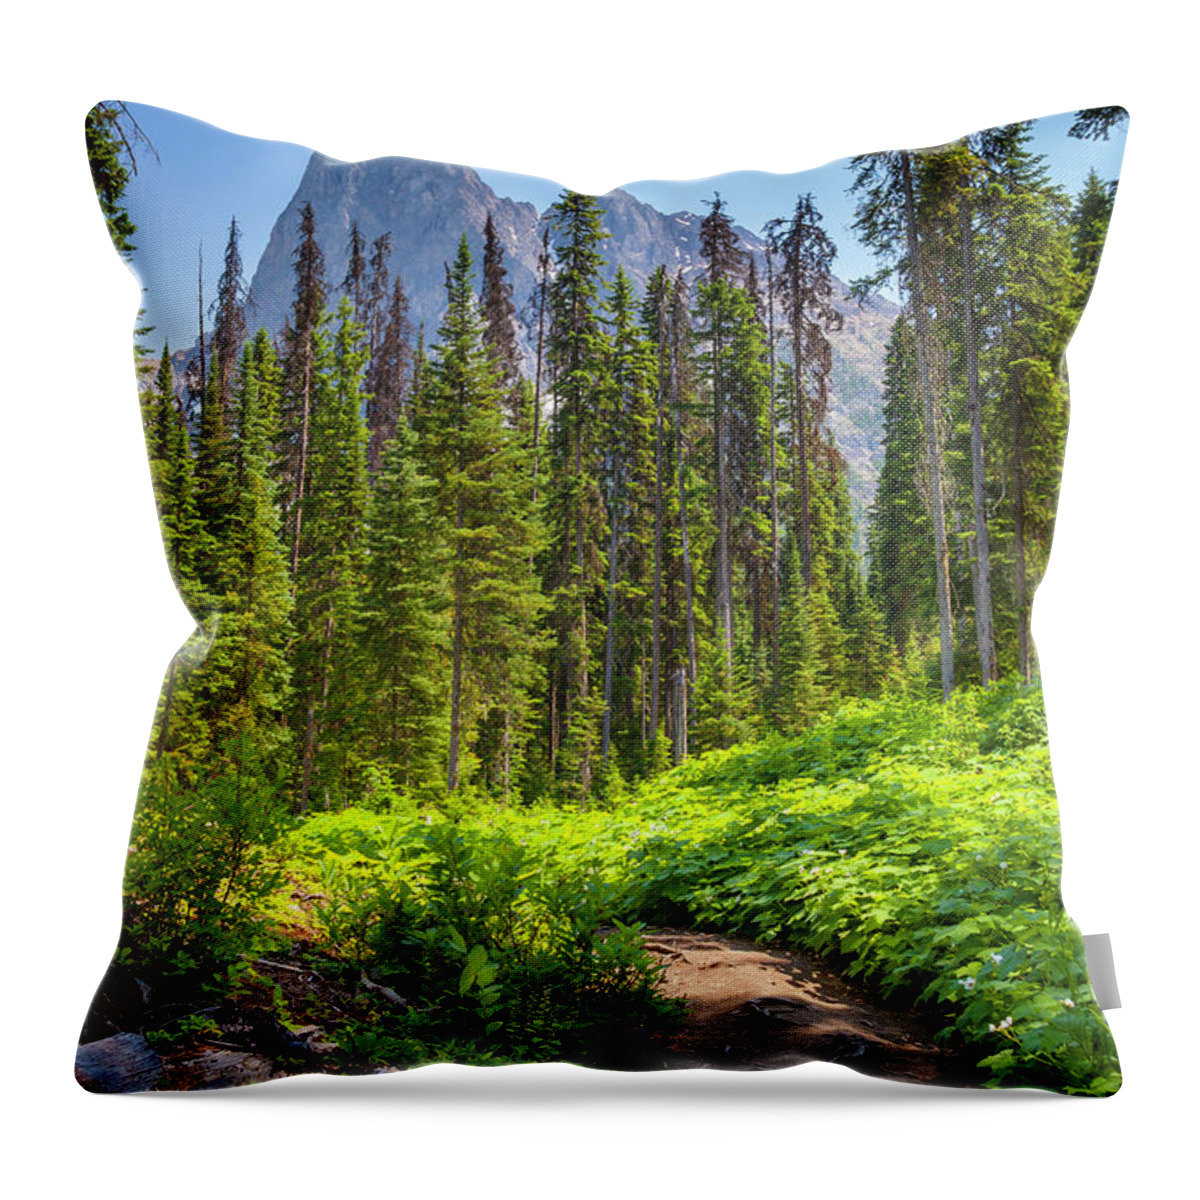 5dii Throw Pillow featuring the photograph Emerald Lake Circuit by Mark Mille